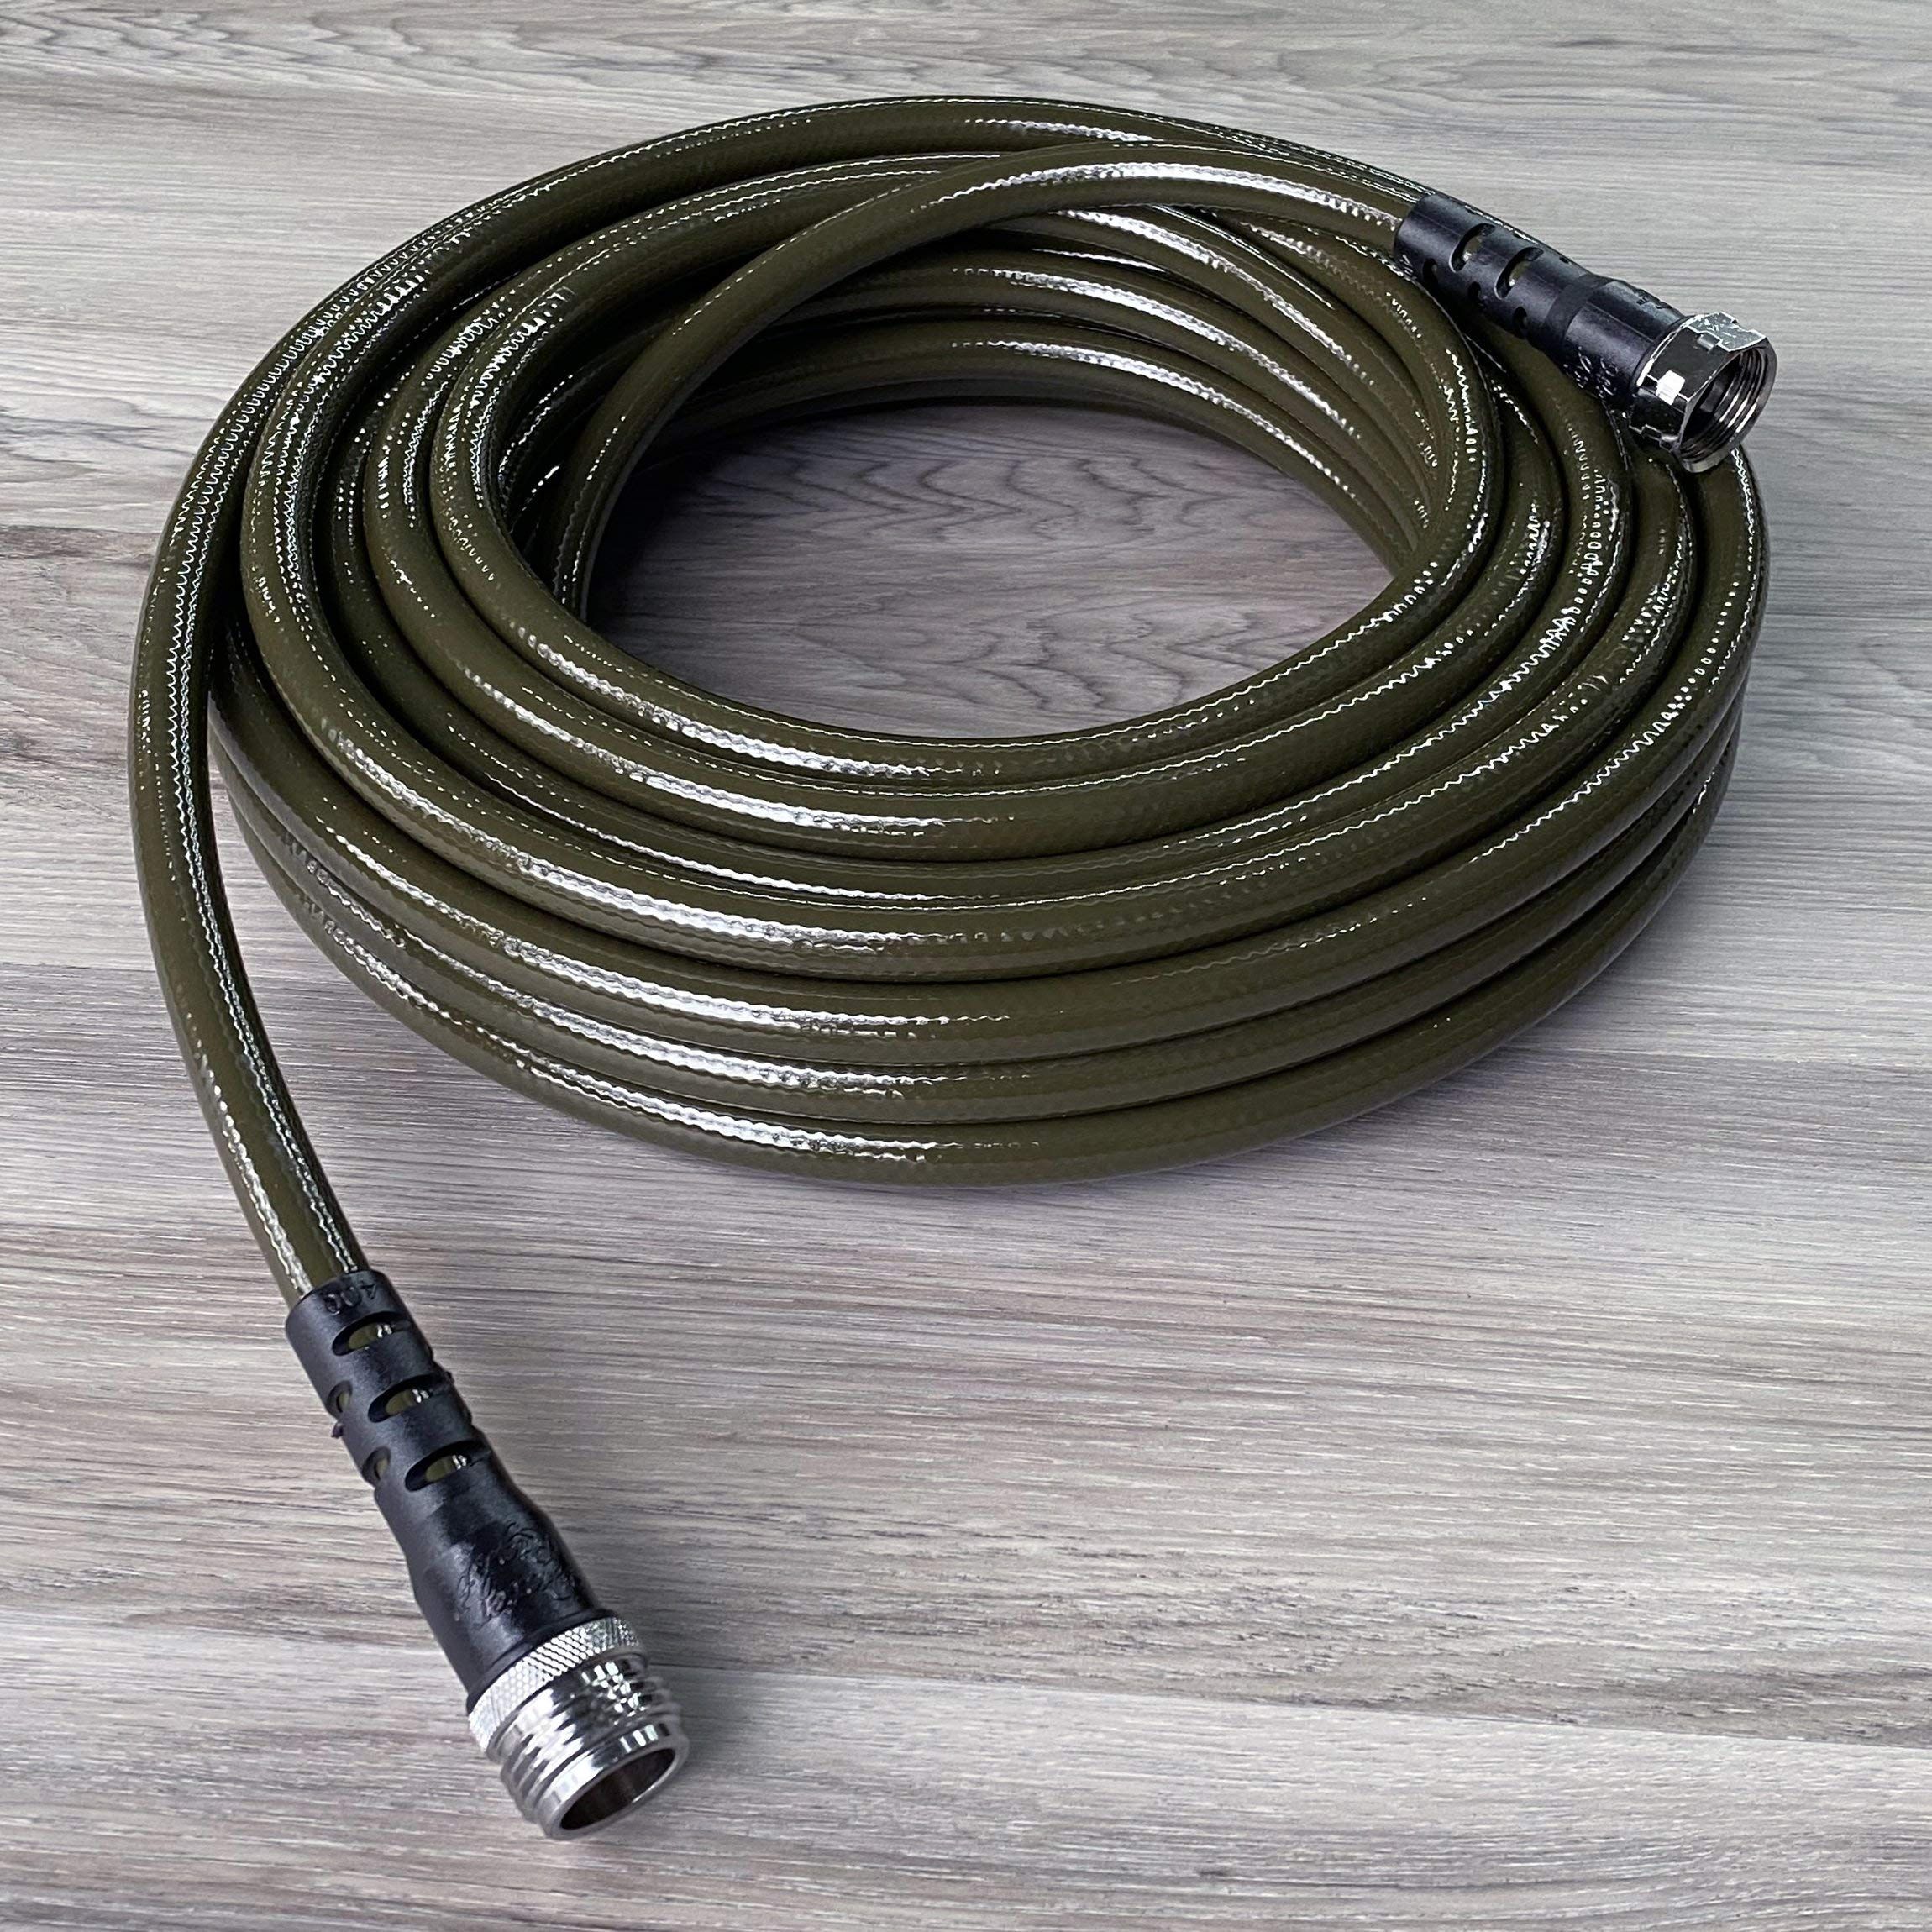 Water Right PSH-050-MG-4PKRS (7/16") 400 Series Hose, 50-Foot, Olive Green | Amazon (US)